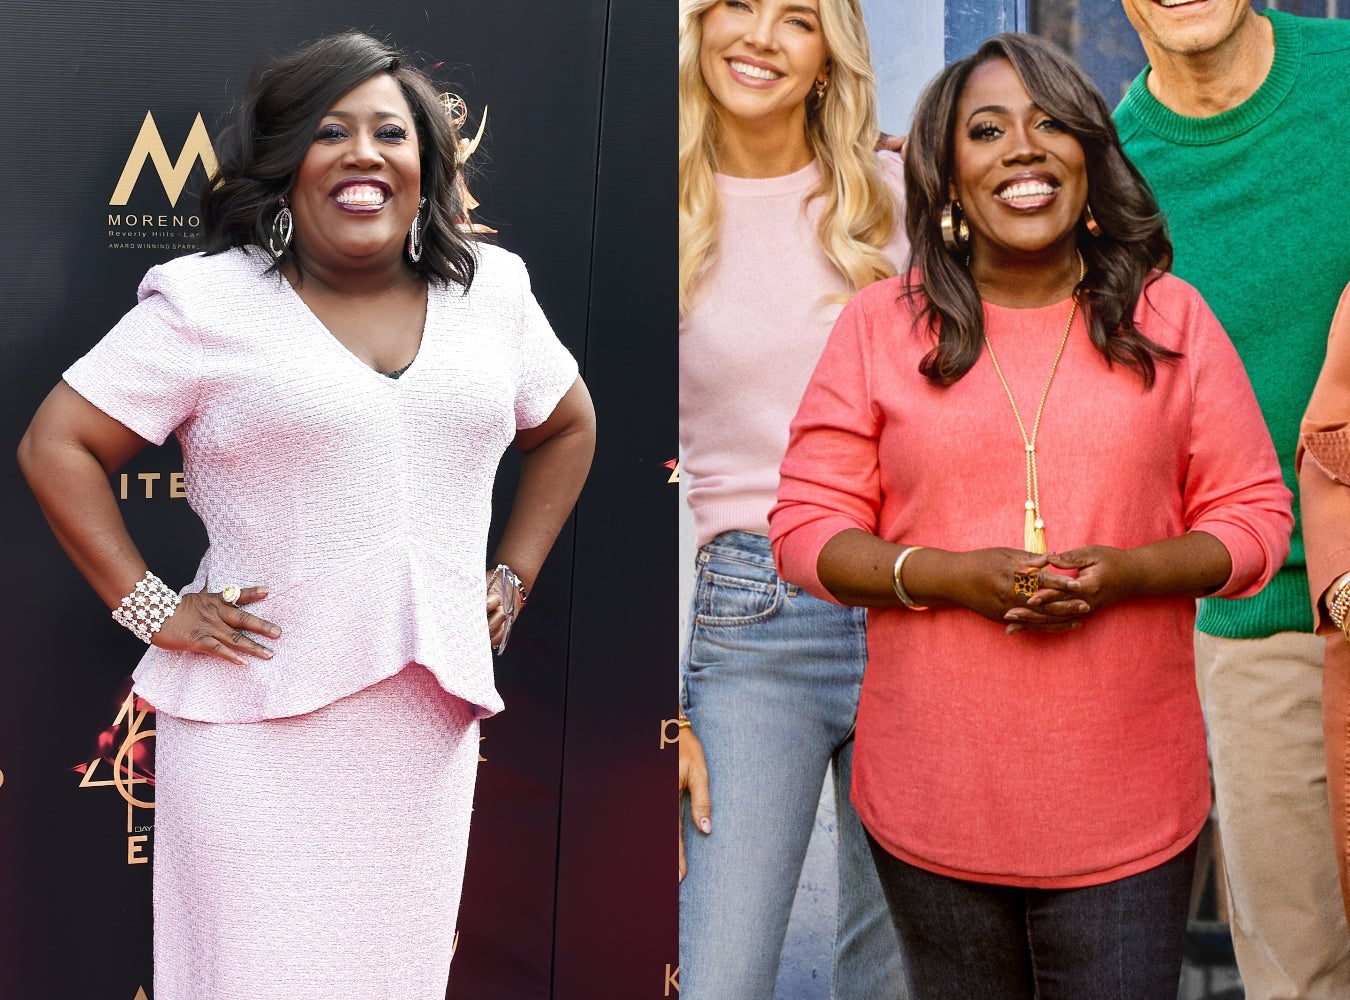 Sheryl Underwood Lost 90 Pounds And Counting Thanks To This Recommendation From Her Doctor